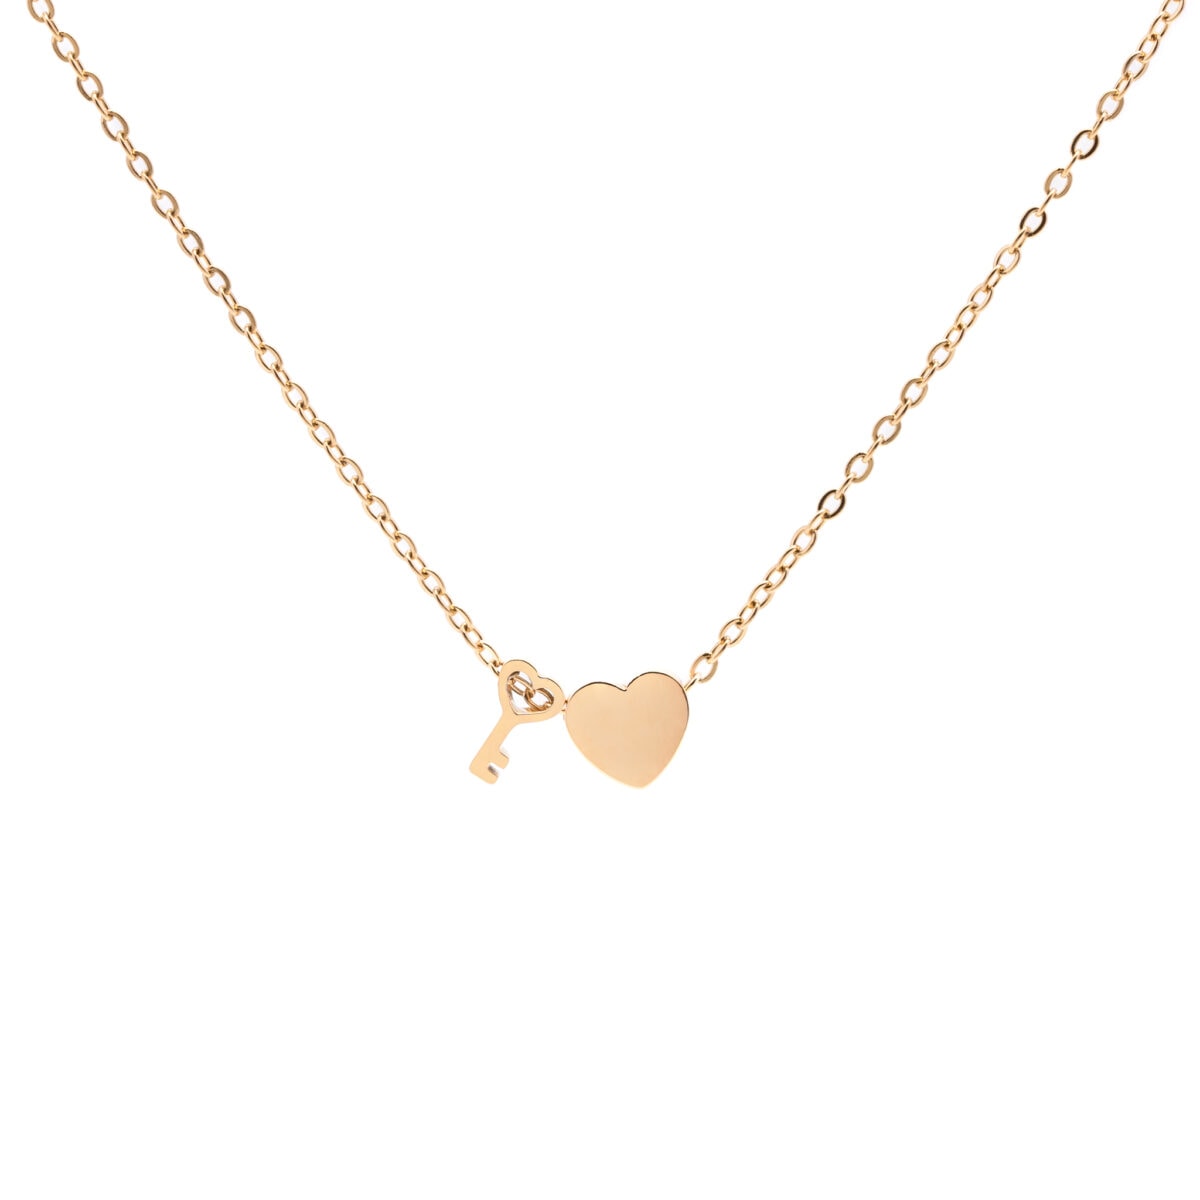 https://m.clubbella.co/product/key-to-thee-heart-gold-charm-necklace/ Key to Thee Gold (2)